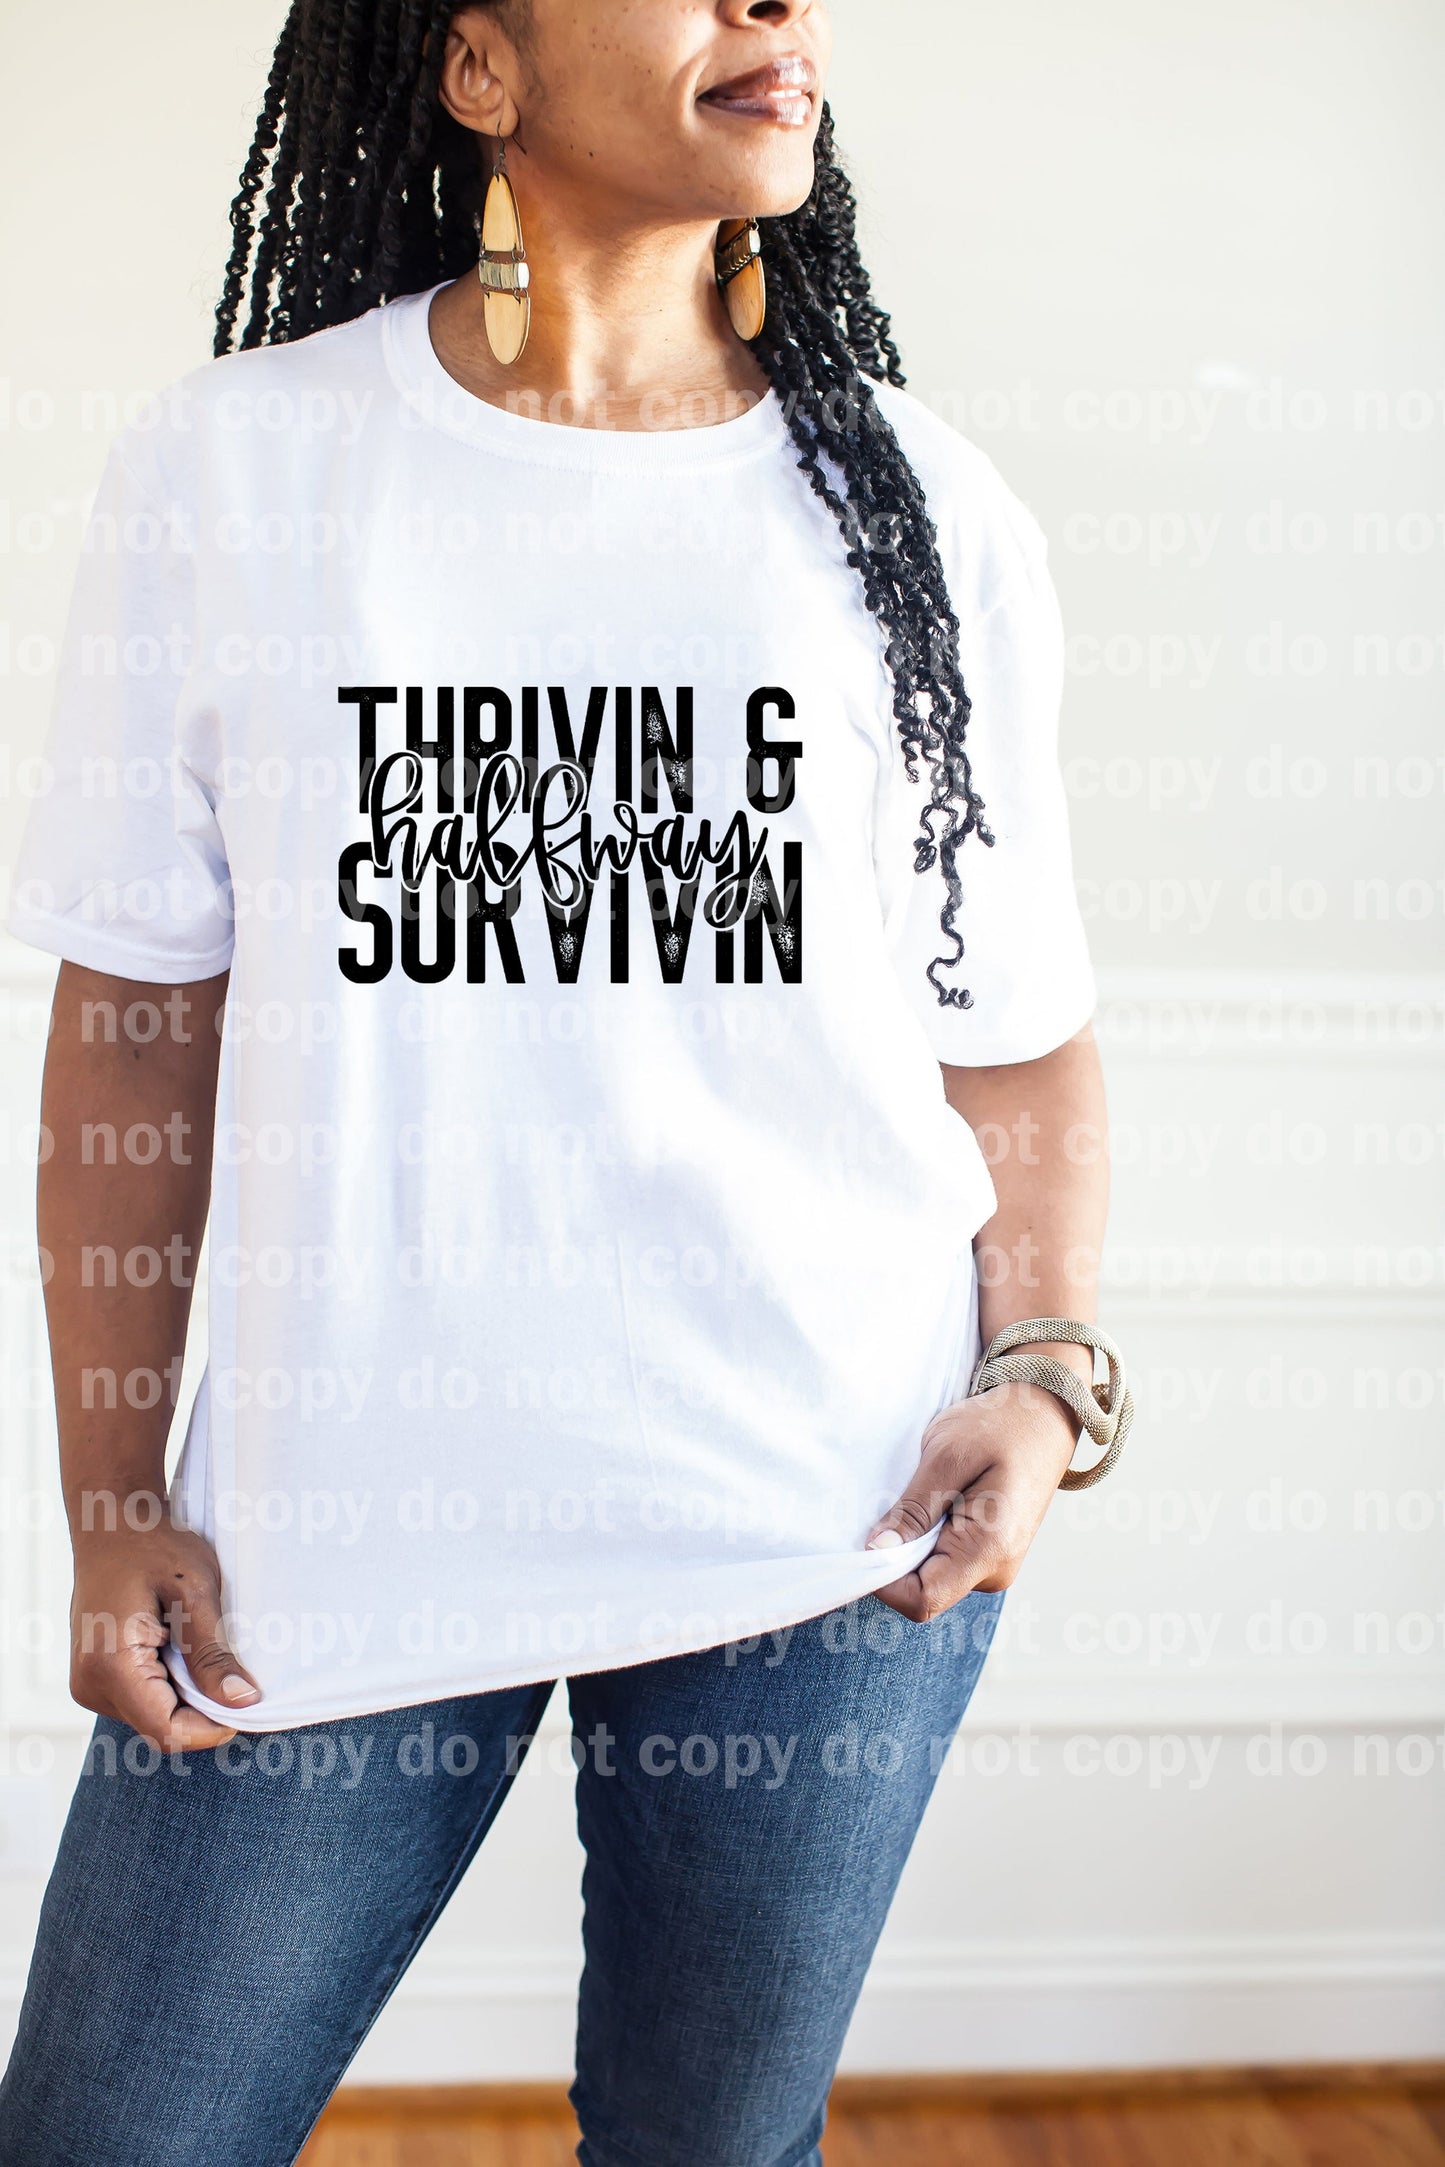 Thrivin And Halfway Survivin Dream Print or Sublimation Print